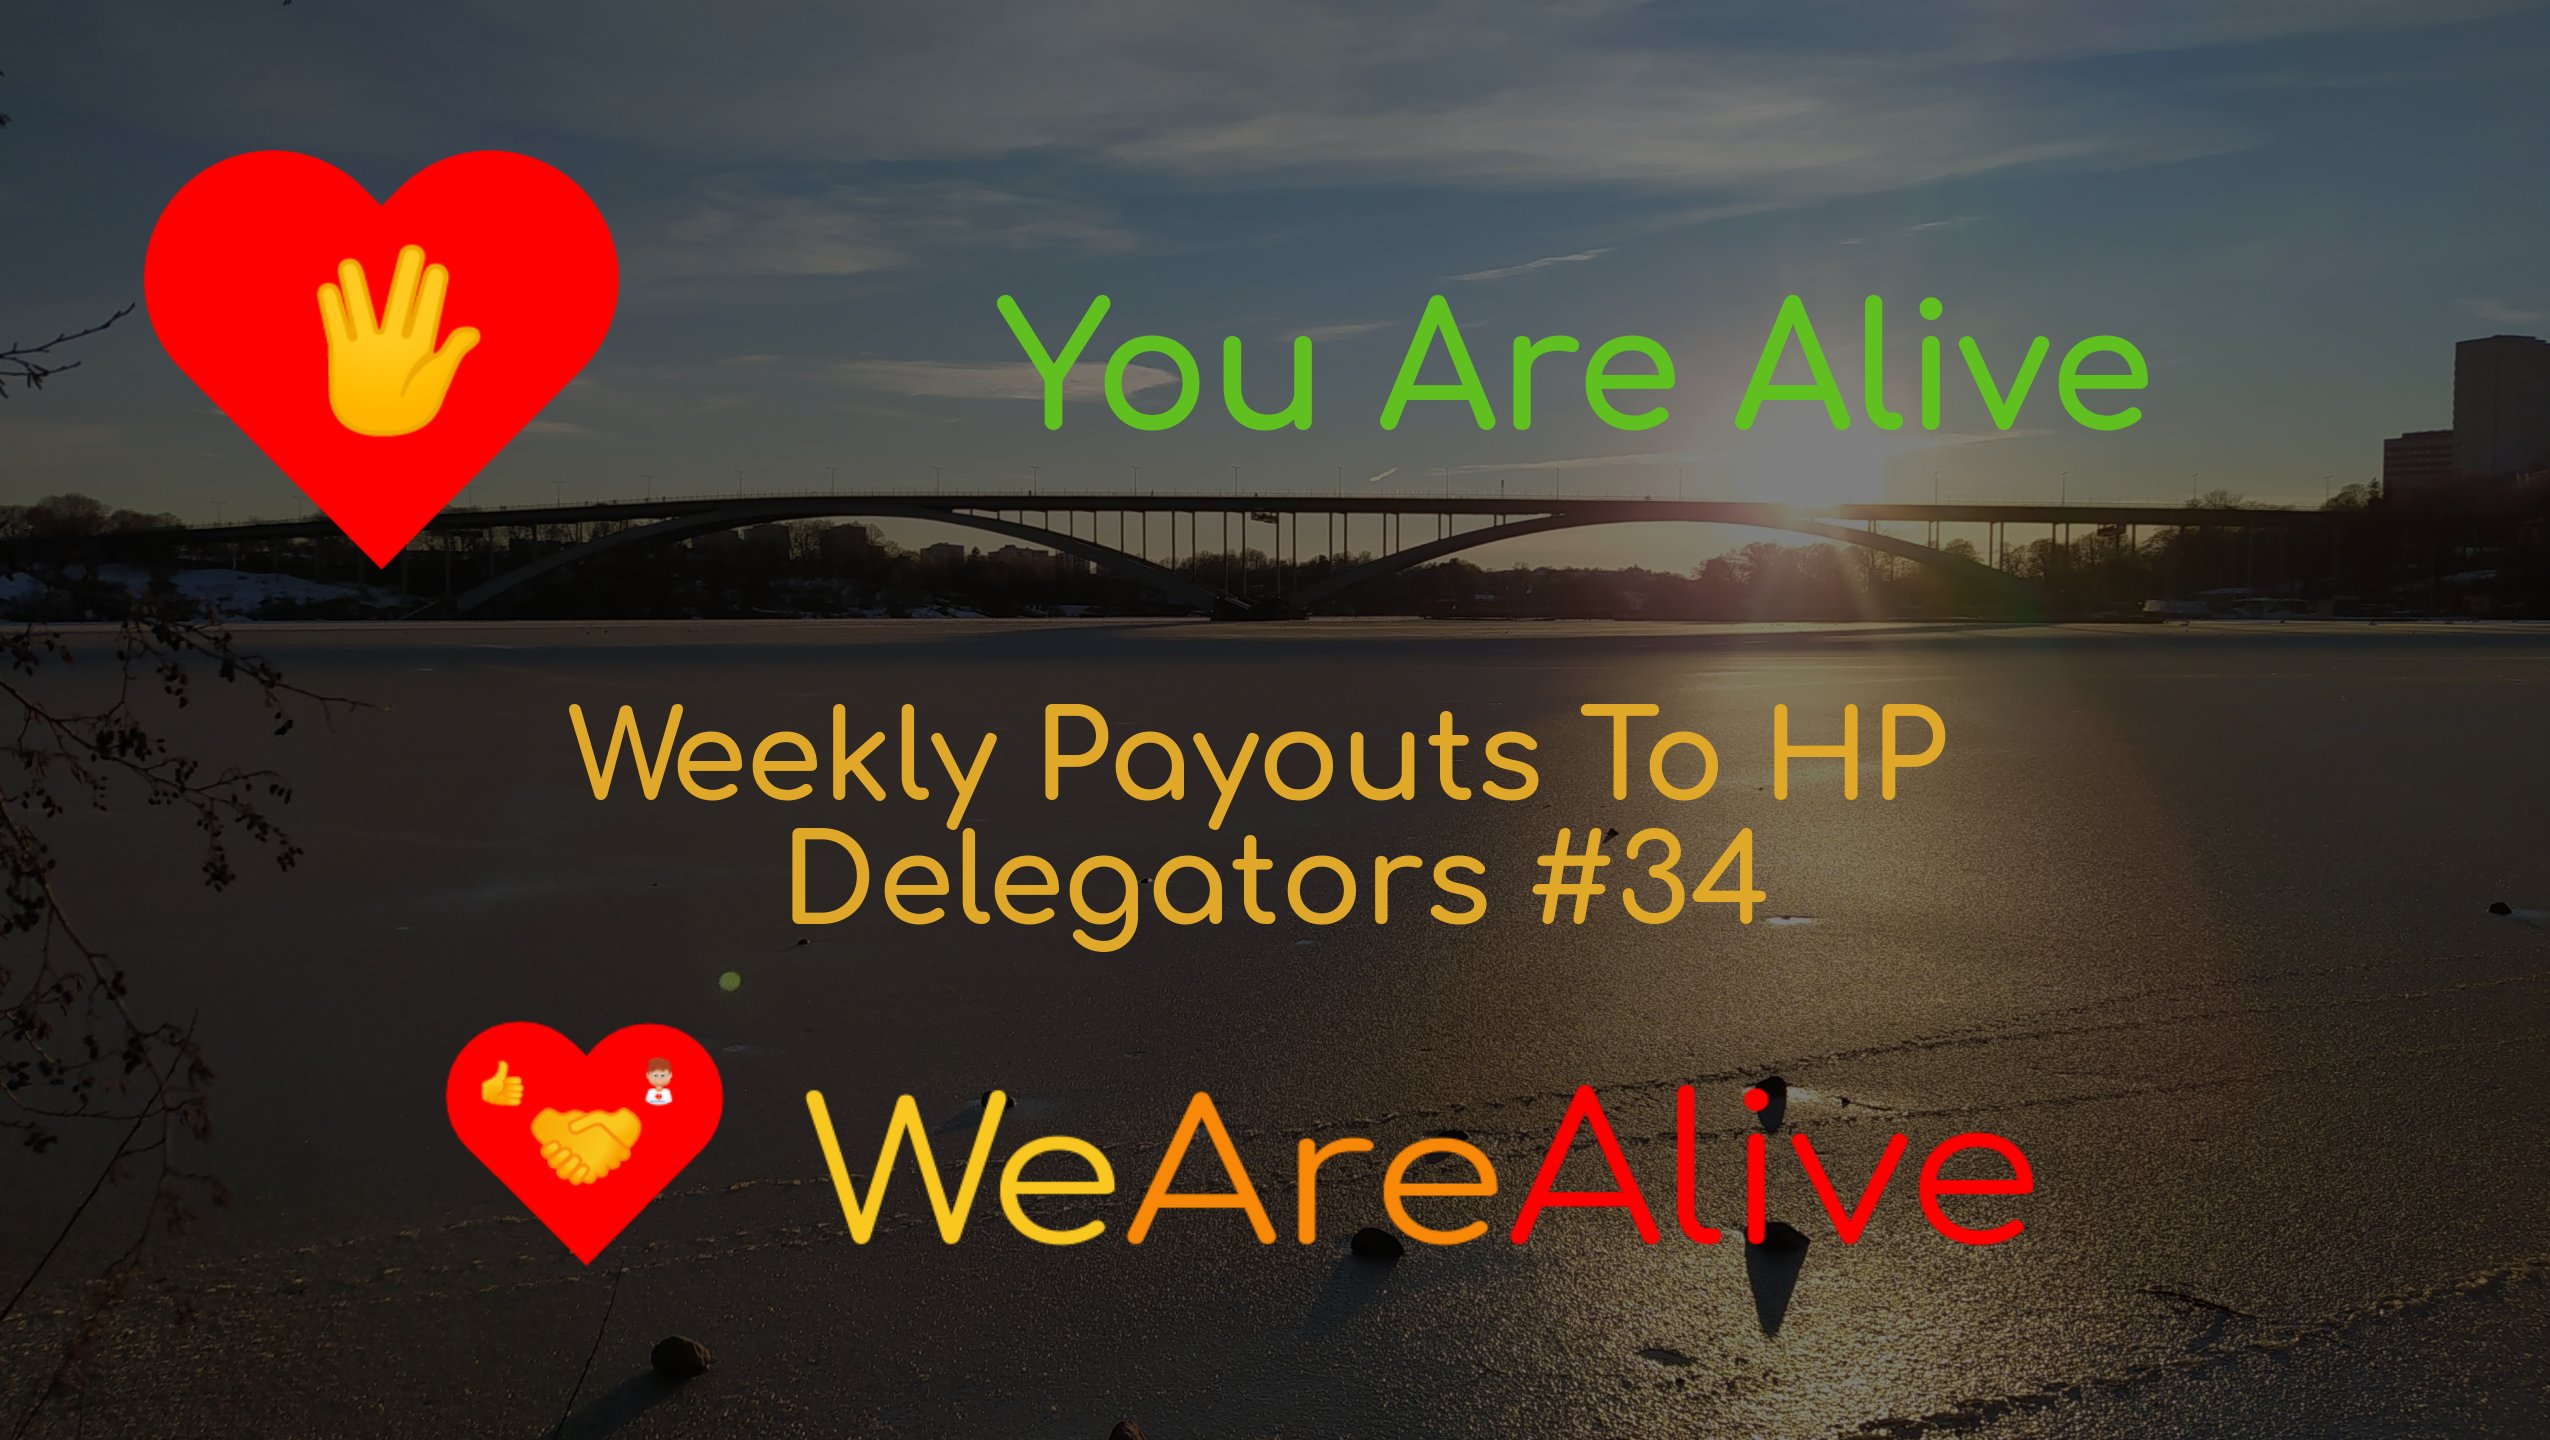 @youarealive/you-are-alive-weekly-payouts-to-hp-delegators-34